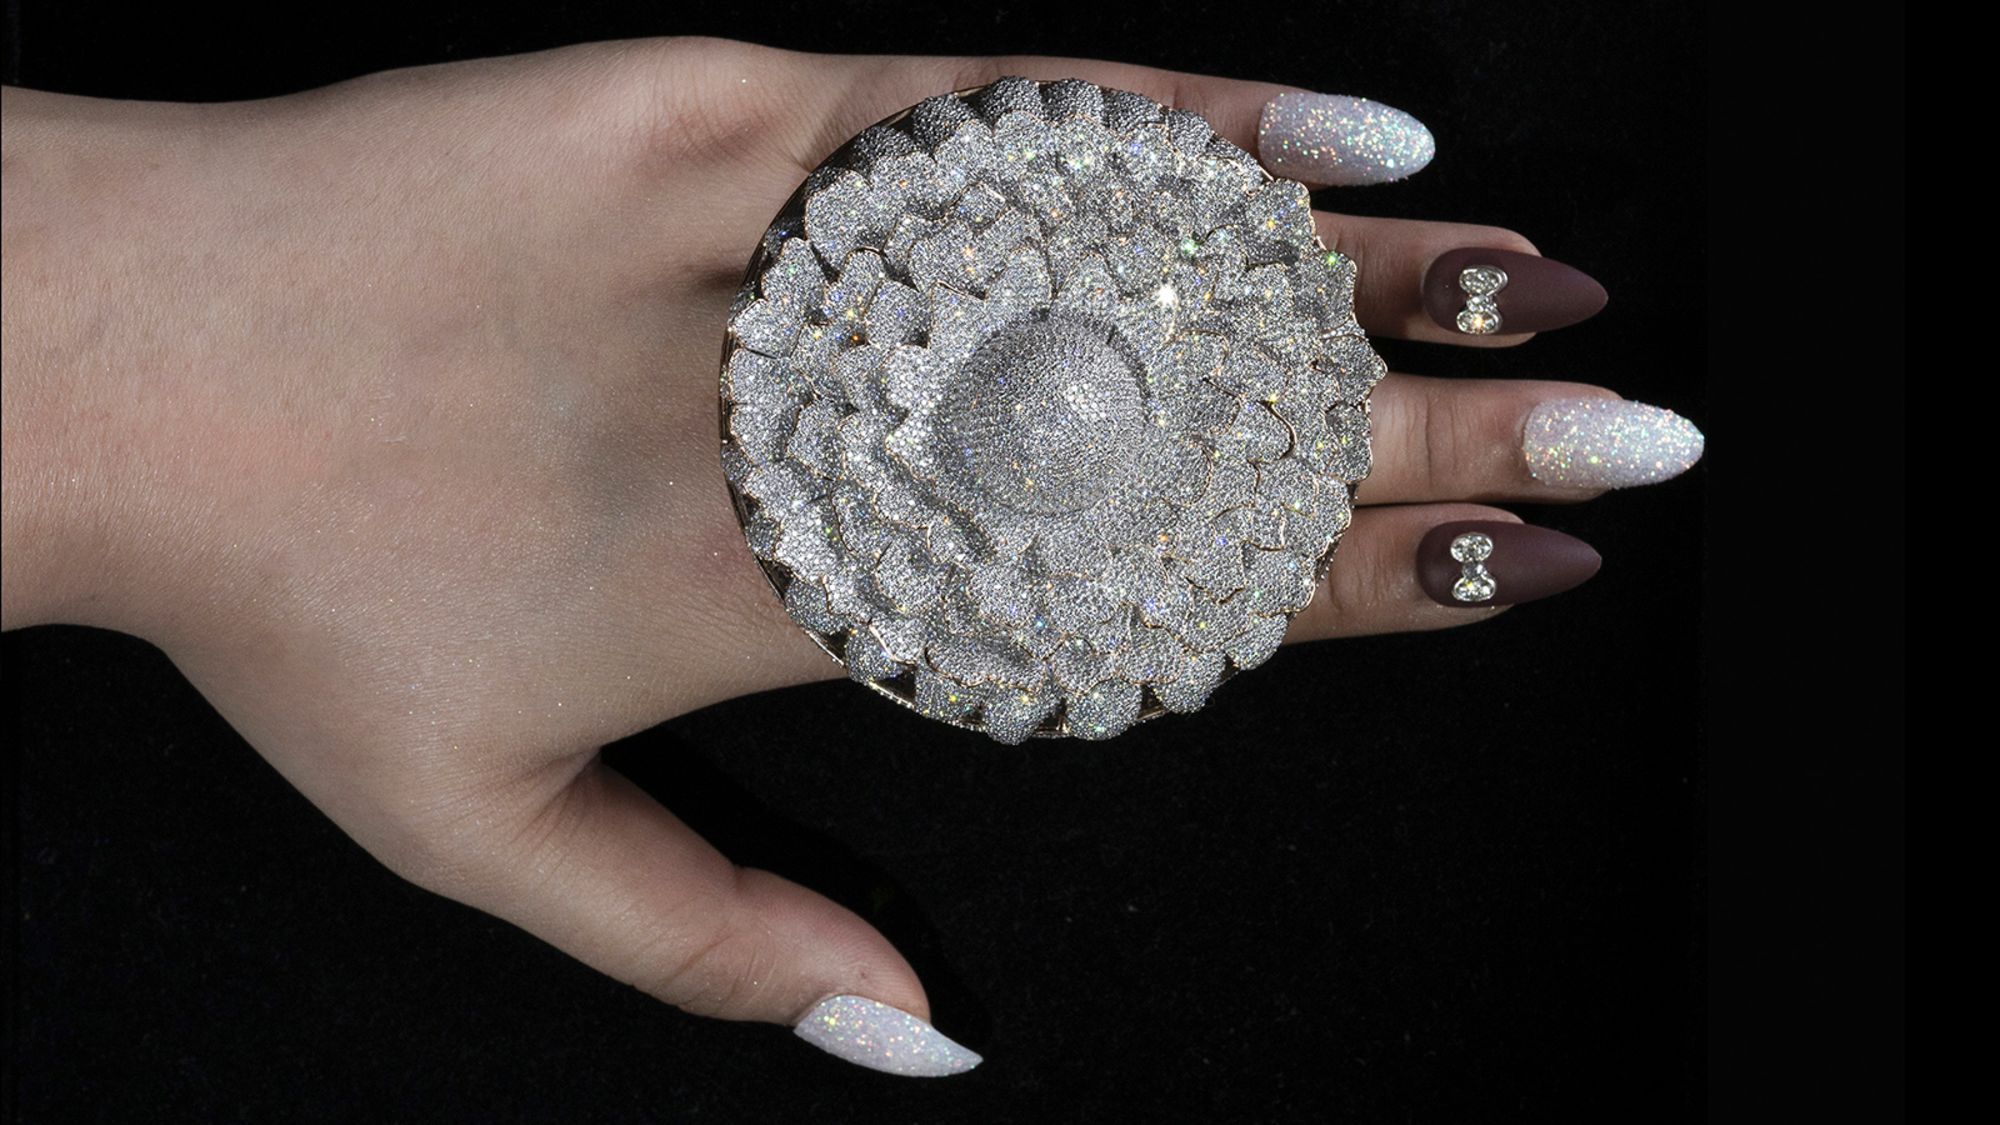 A ring with 12,638 diamonds sets a Guinness World Record